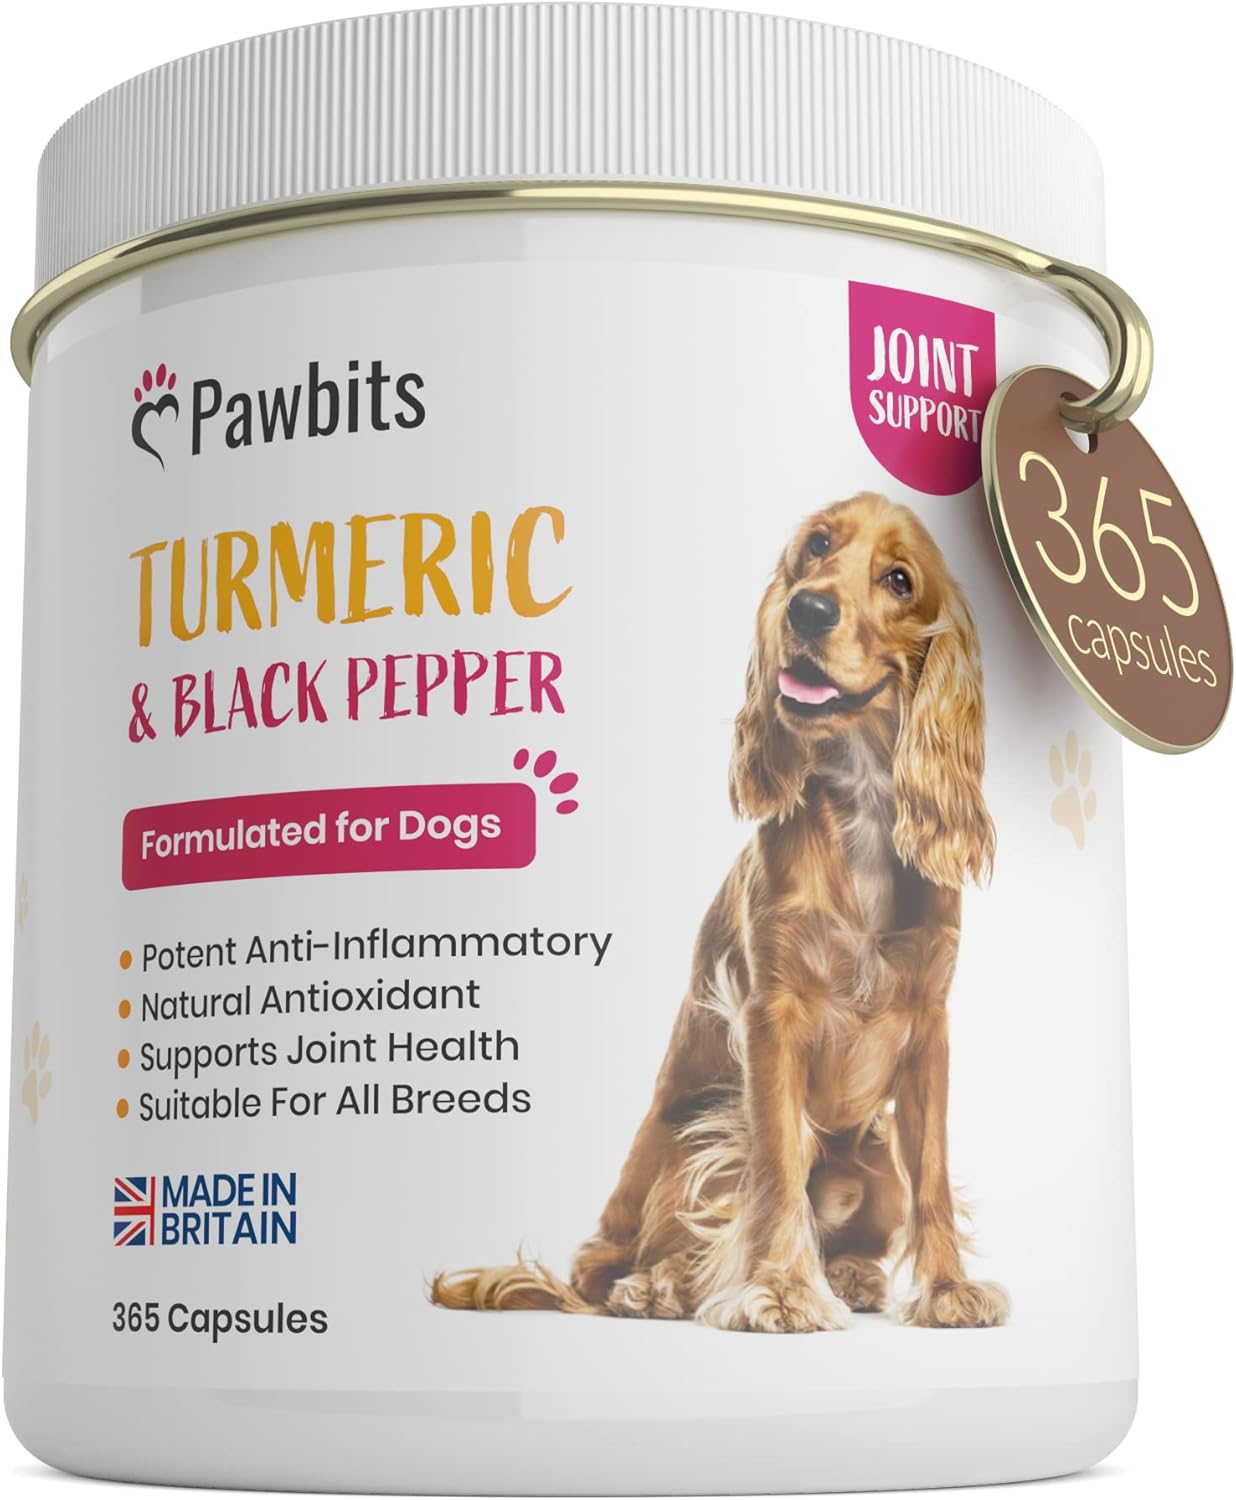 365 Turmeric for Dogs with Active Bioperine Black Pepper | Natural Premium Turmeric Curcumin Capsules suitable for Cats, Horses & Pets Powerful Antioxidant Supplement for Hip & Joints